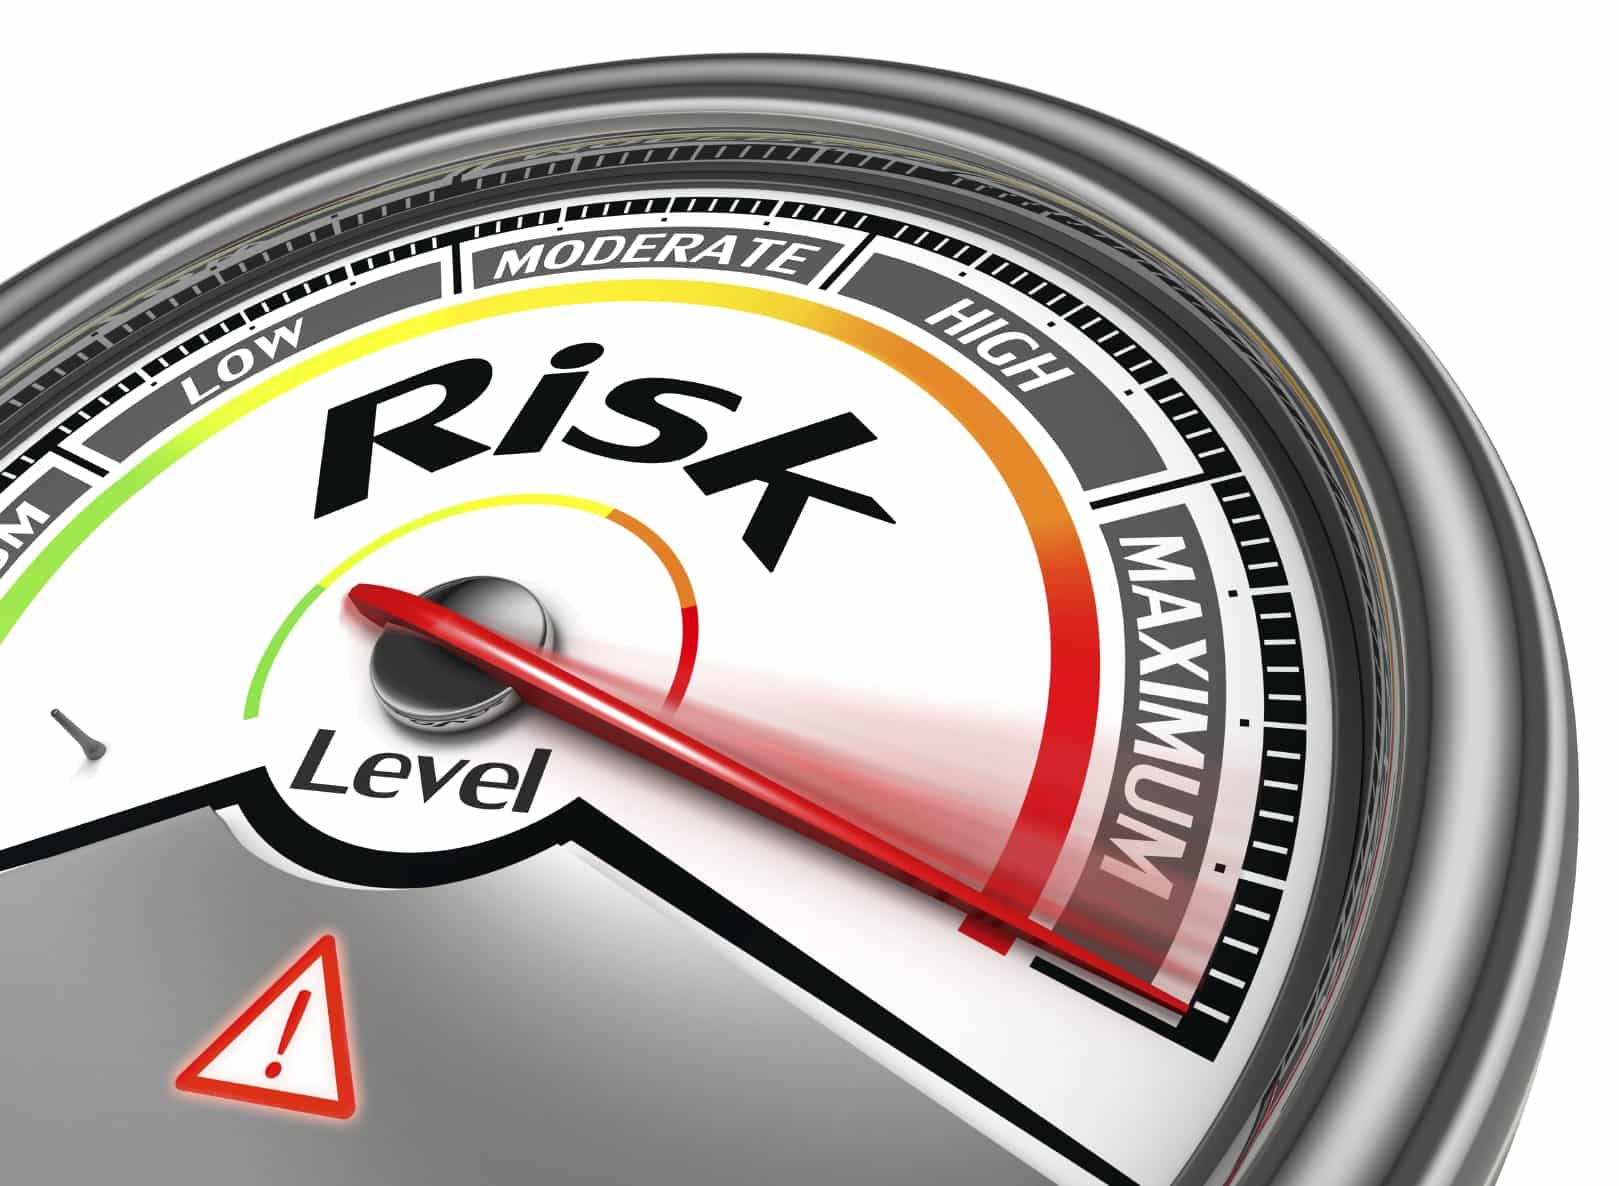 5 Ideas for Minimizing Risks in Your Small Business